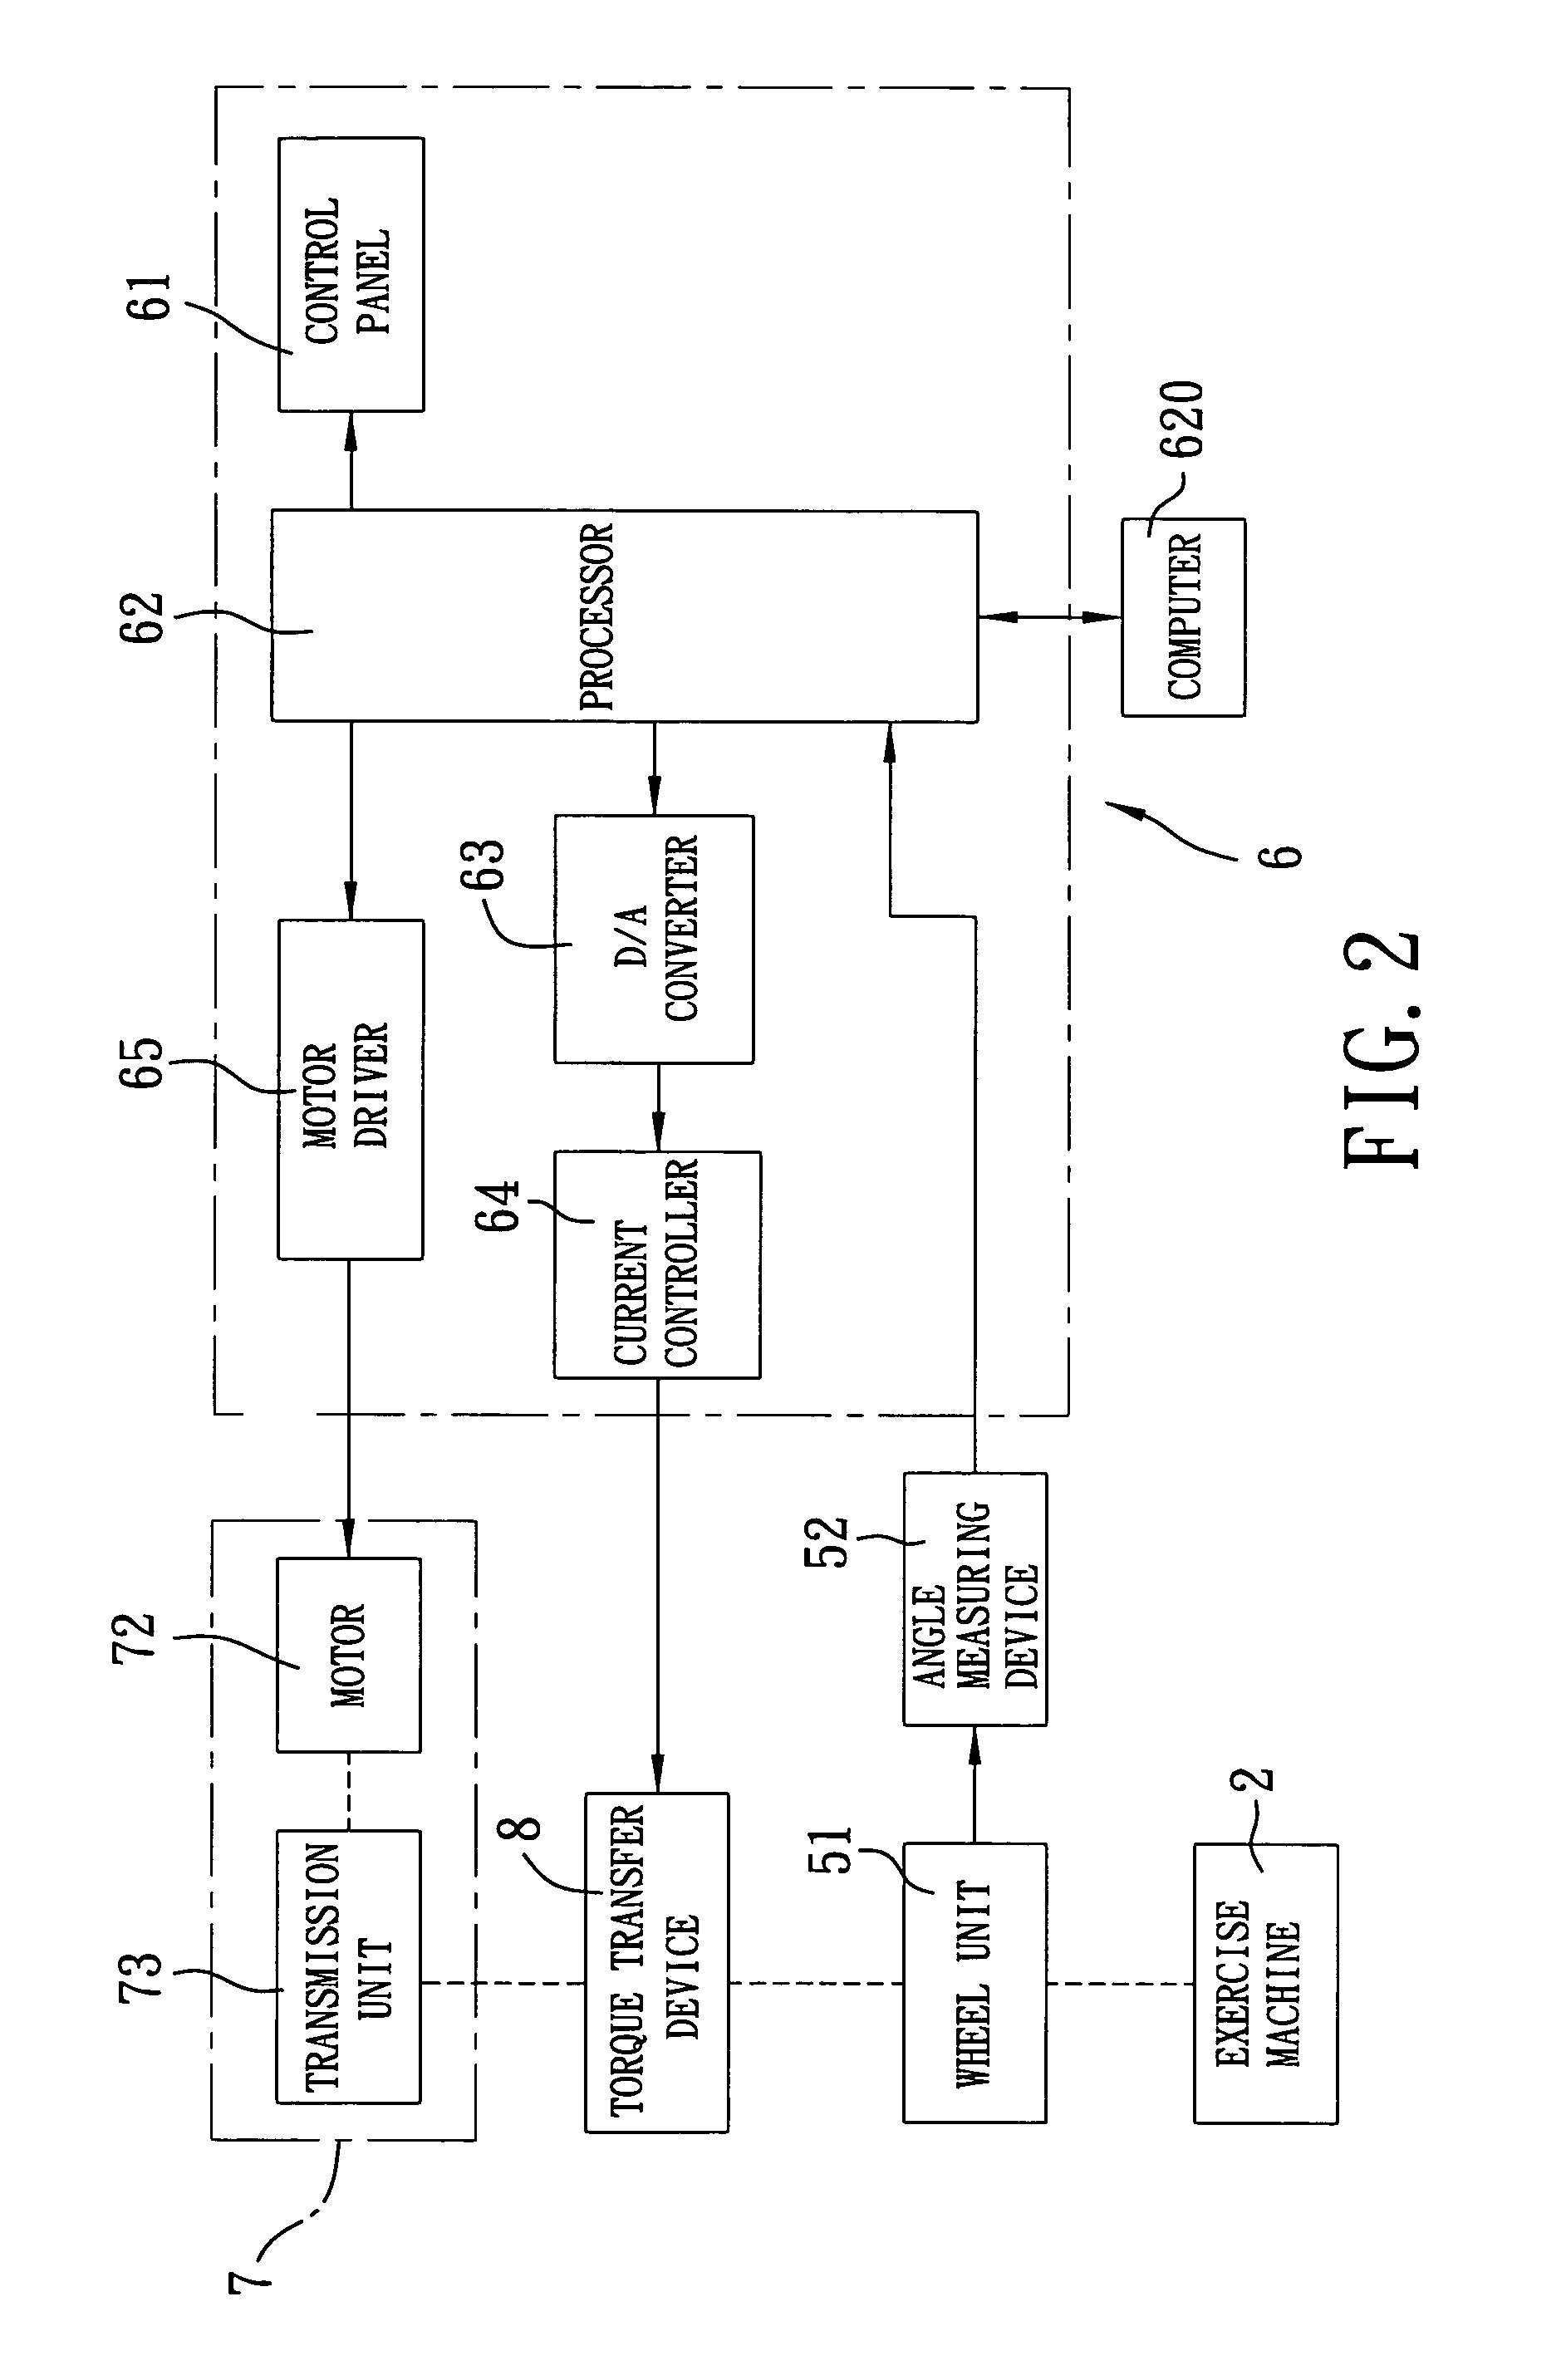 Method and apparatus for providing a dynamically variable resistive load during exercise